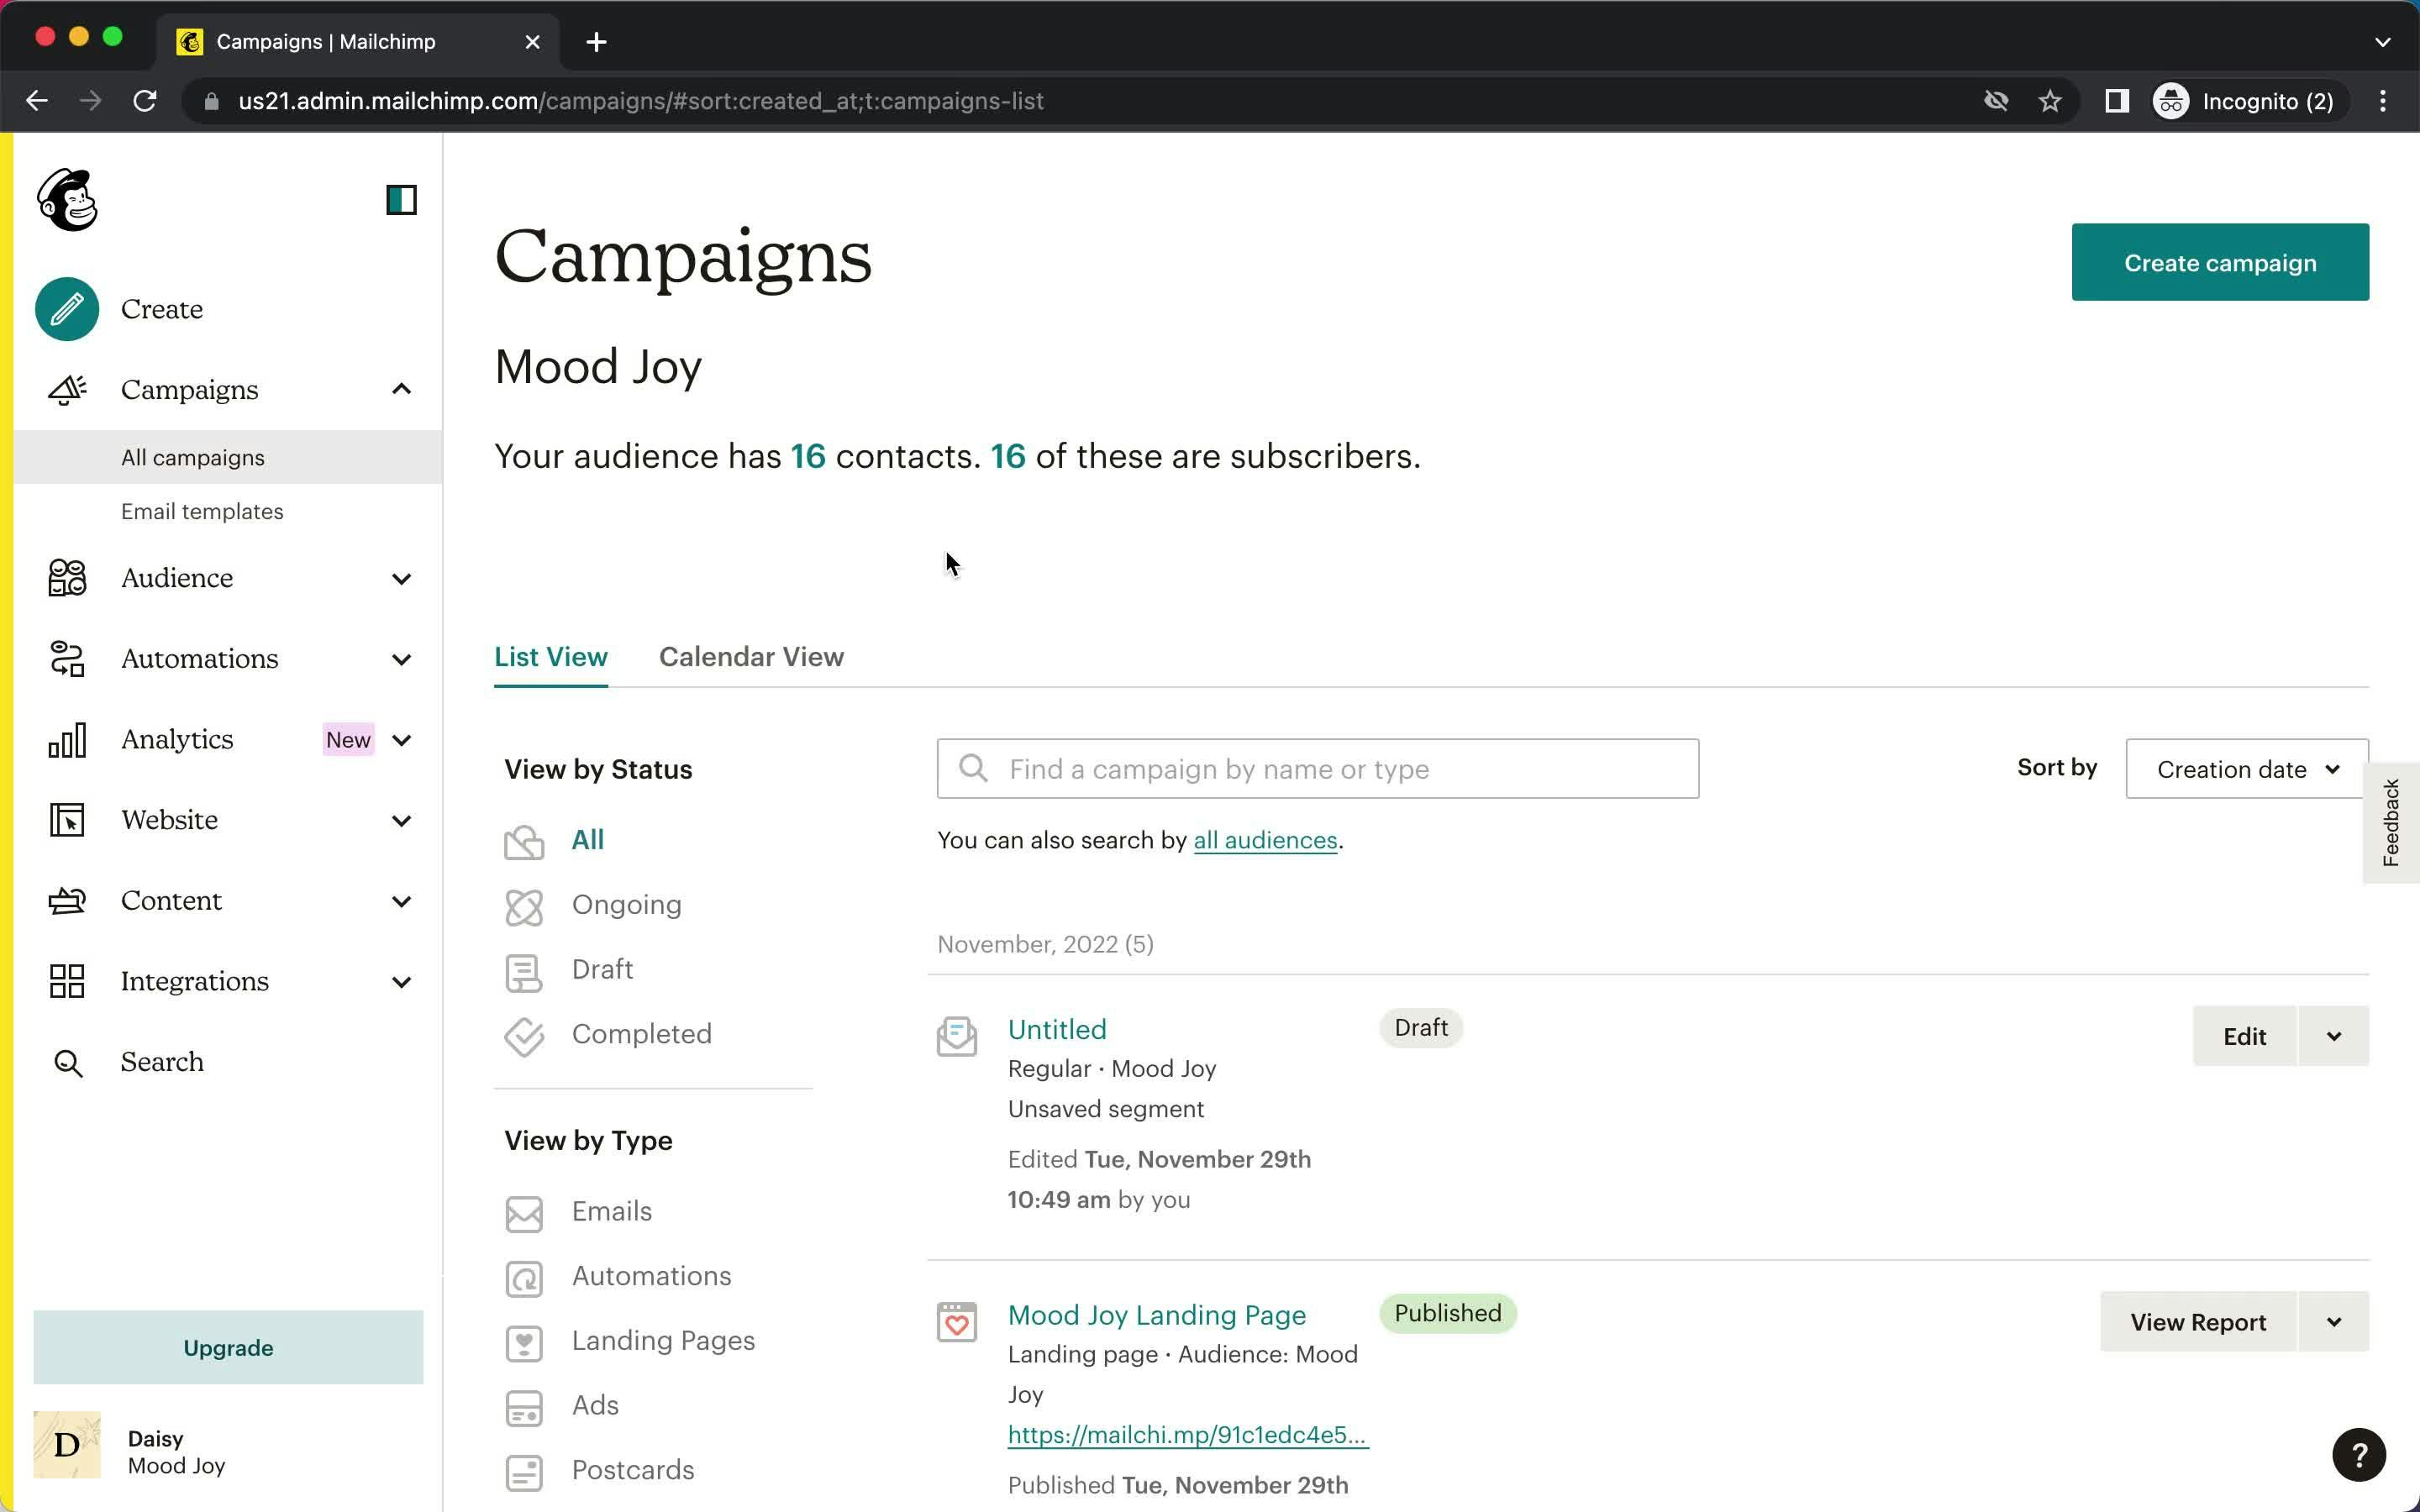 Screenshot of Mailchimp showing all campaigns